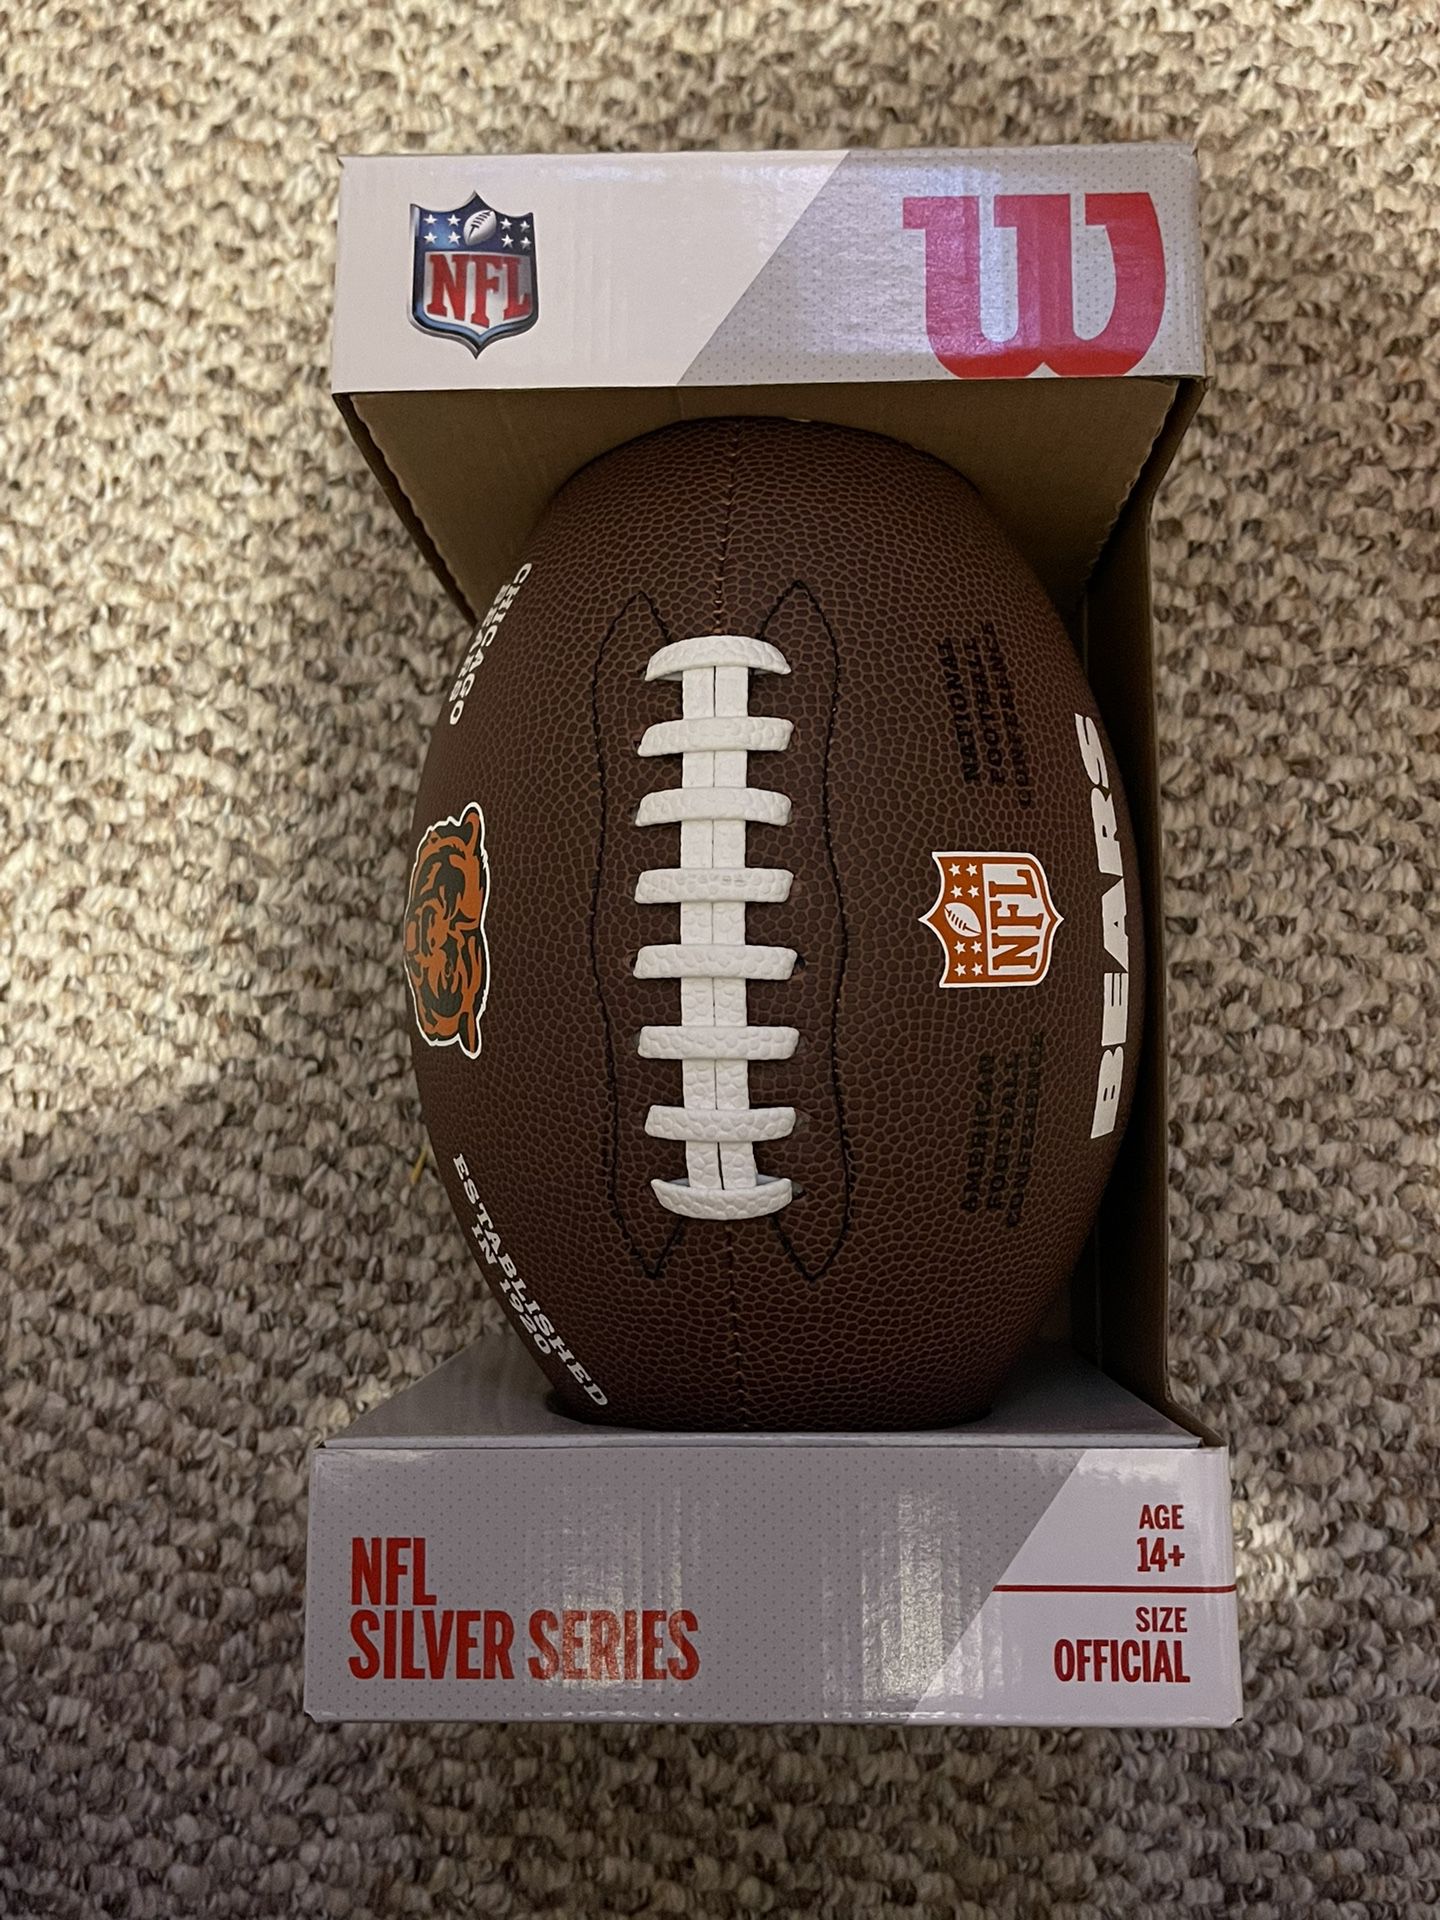 WILSON Chicago Bears NFL Silver Series Official Premium Composite Football New